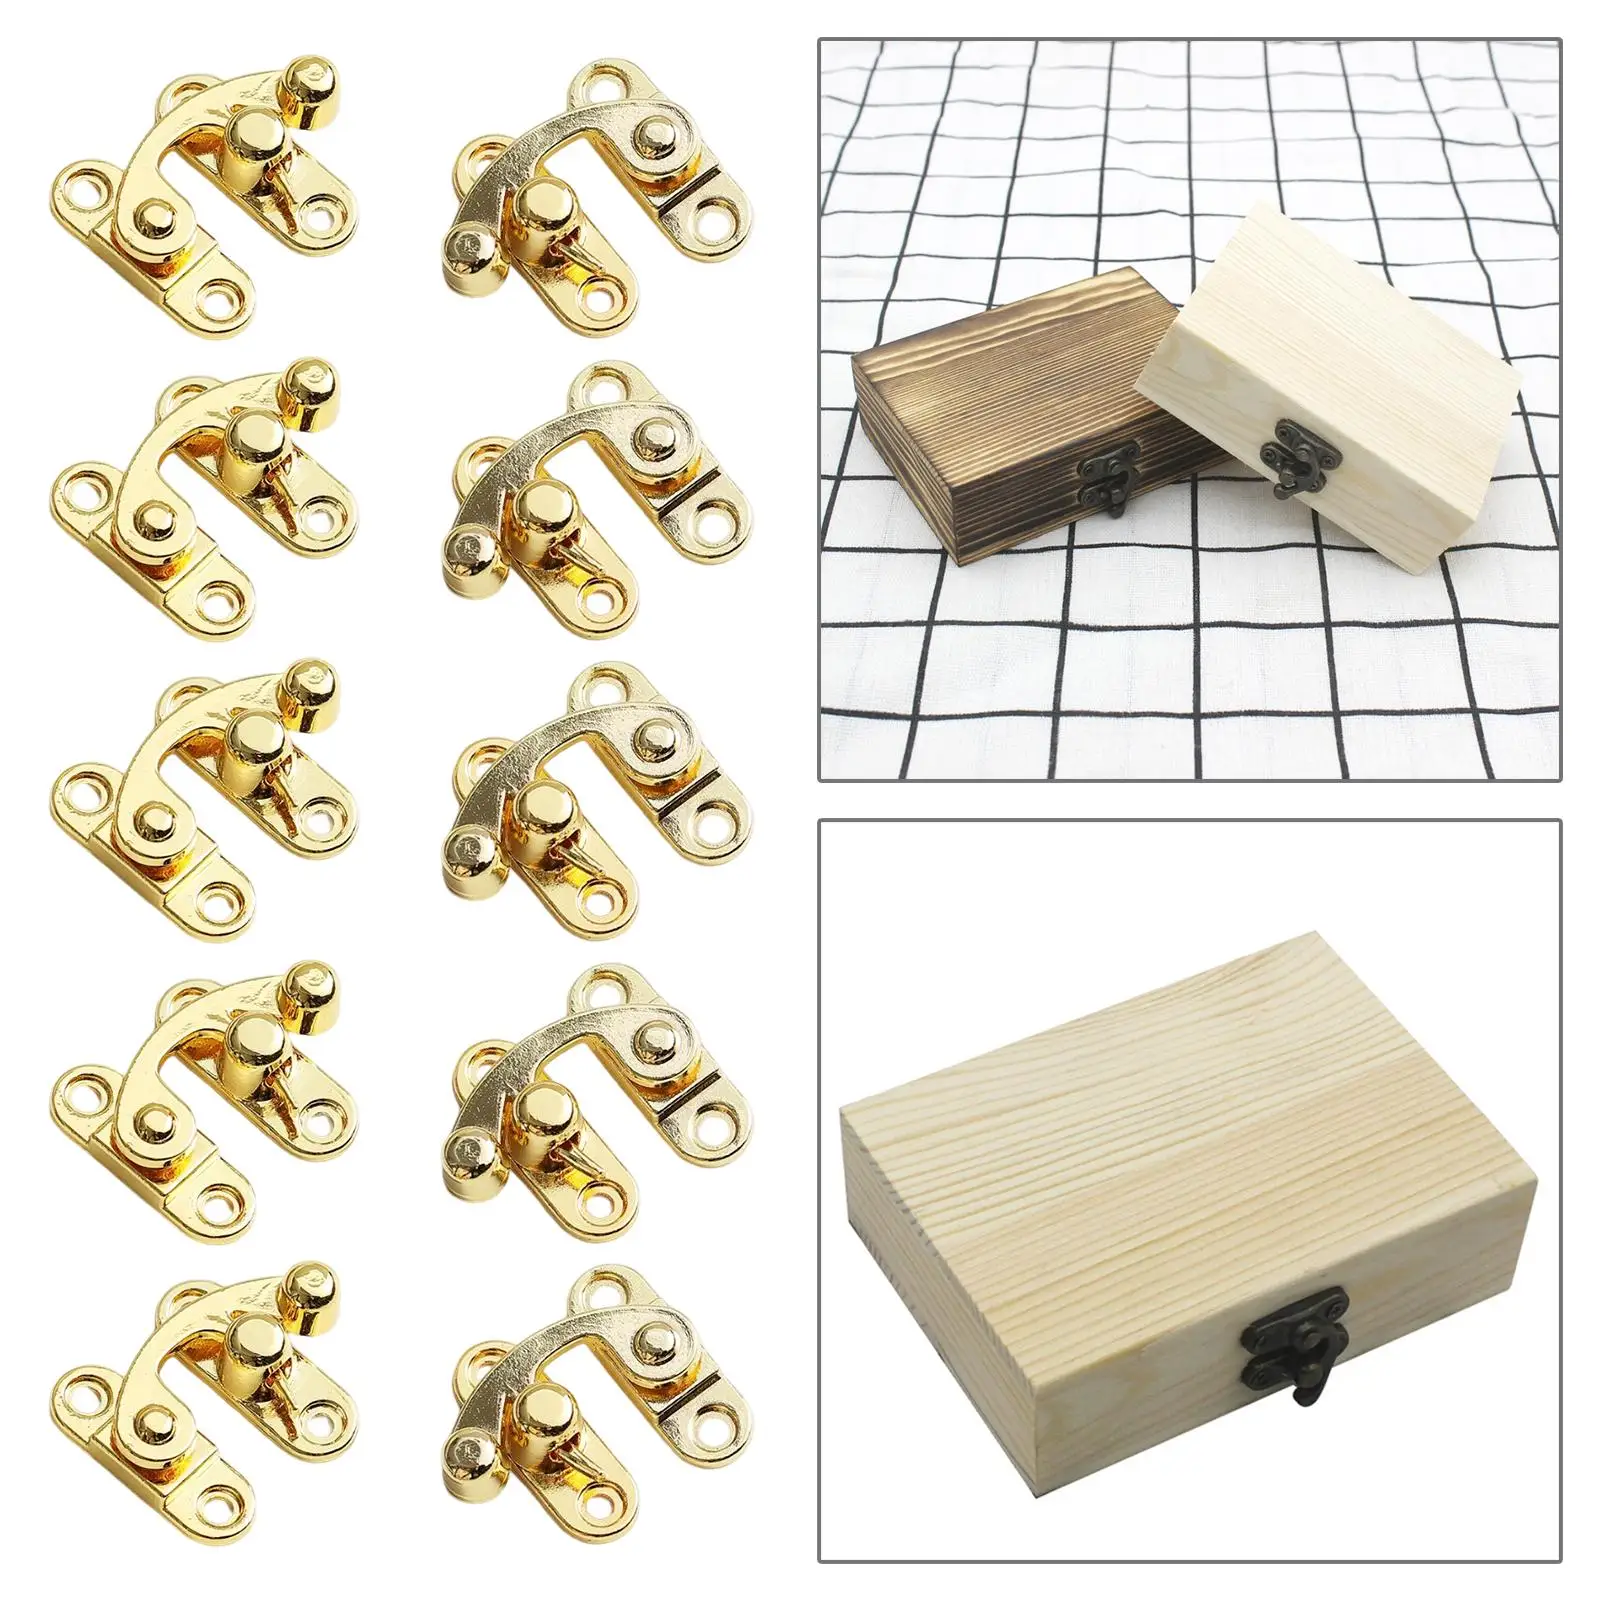 10x  Hasp Horn Lock Latch Buckle Clasp Latch  Left Right Toggle Hardware for Toolbox Suitcase Wood Jewelry Box Decoration